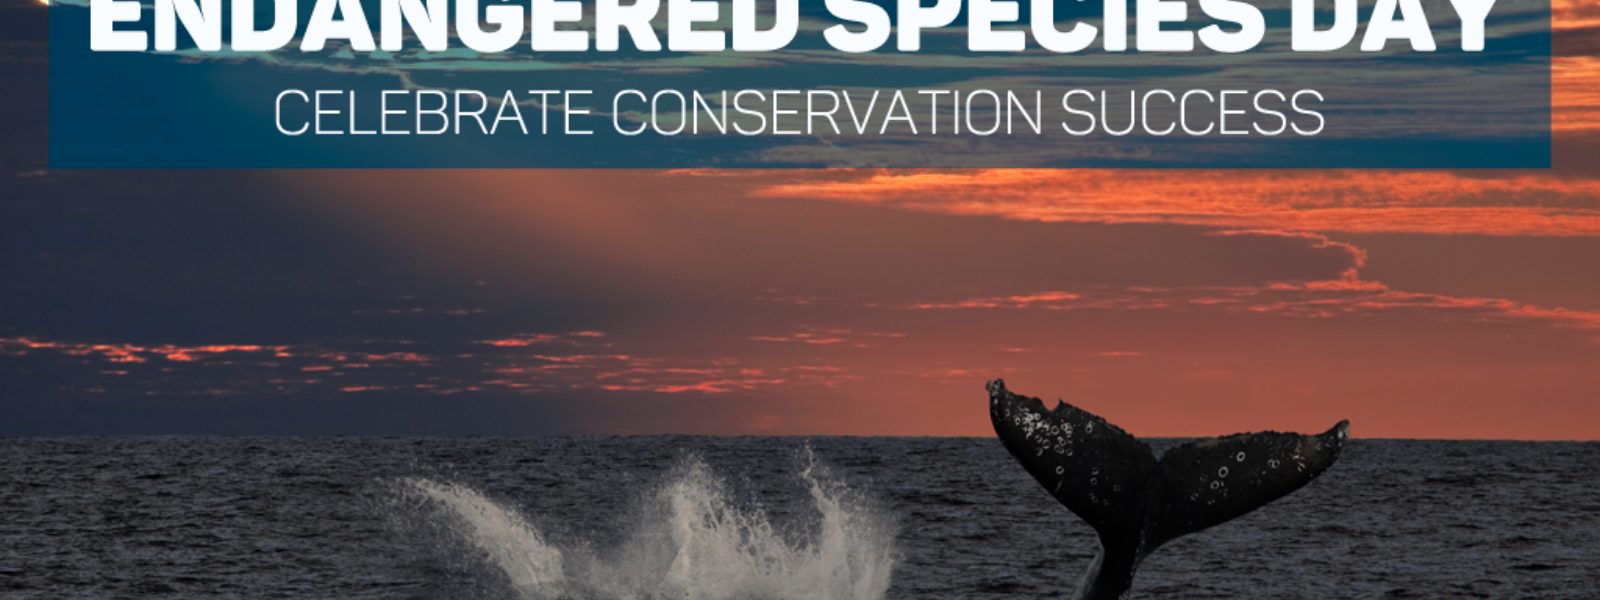 Endangered Species Day! (May 21) - International Marine Mammal Project